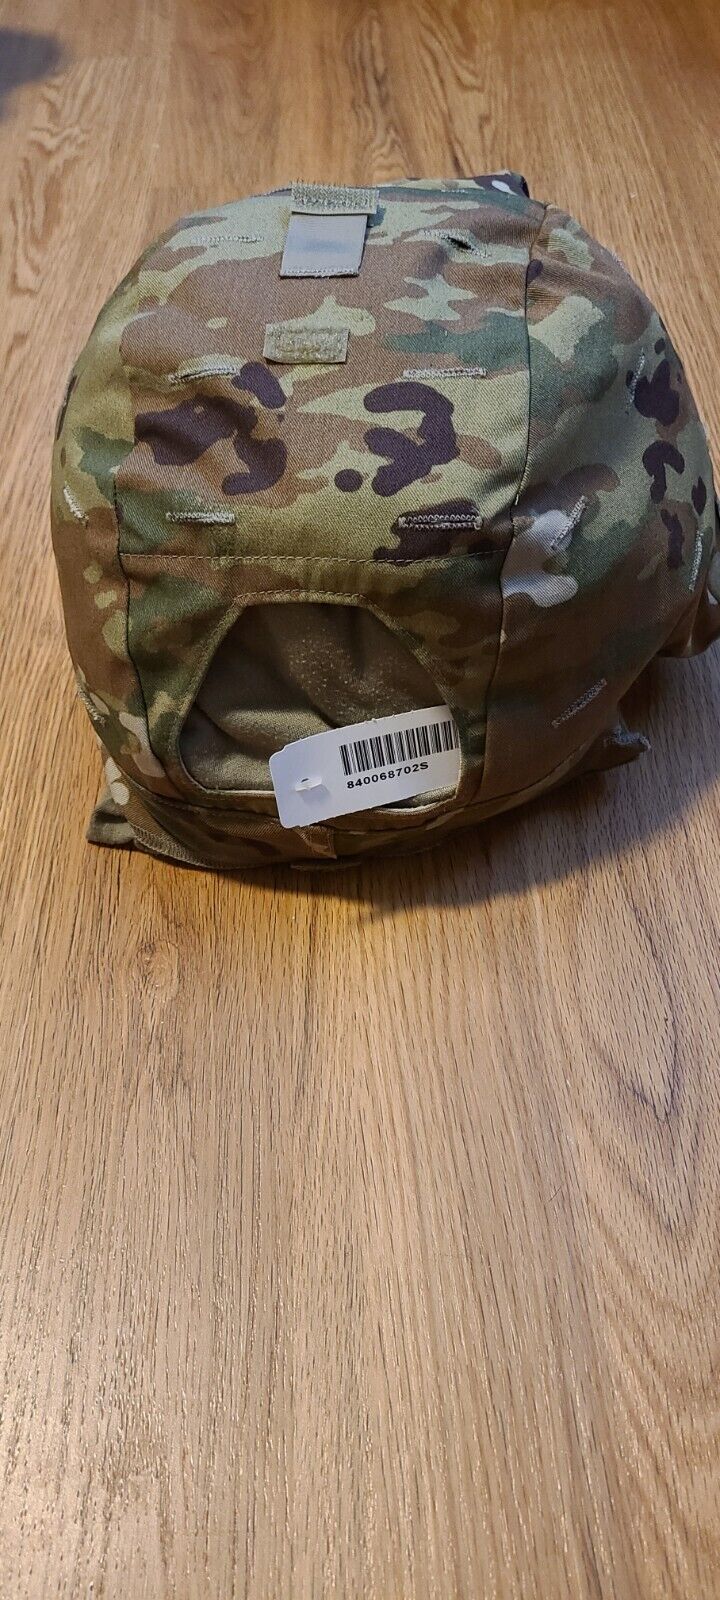 HELMET COVER ECH, ENVG 6 COLOR OCP (LARGE / EXTRA LARGE)